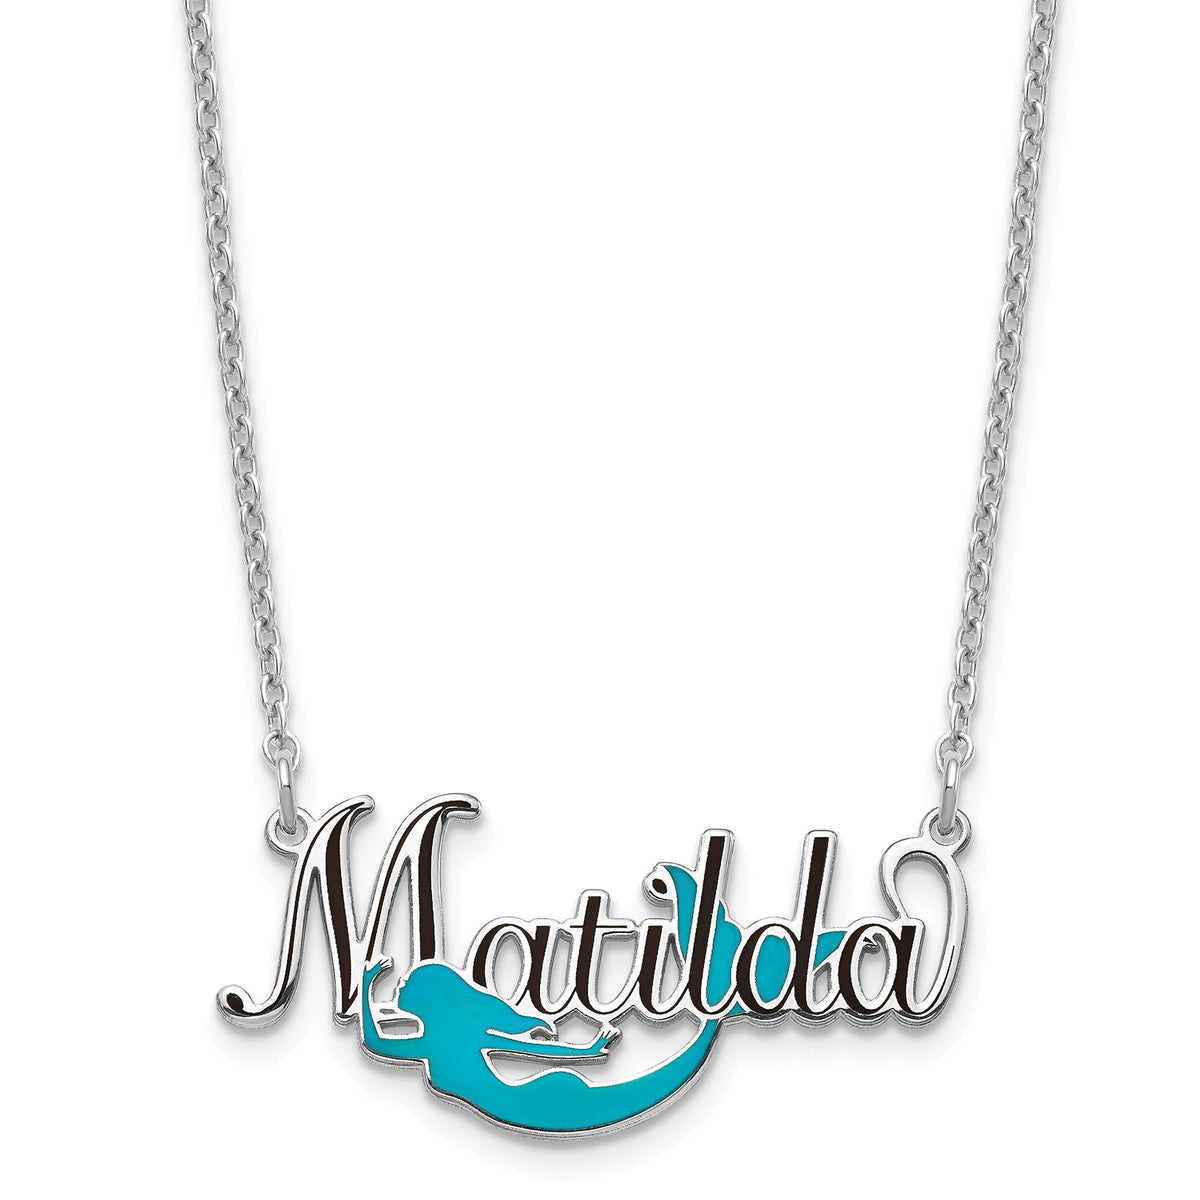 Personalized Mermaid Pendant with Epoxy Necklace (Multiple Colors Available) Gift Box Included (1.15 inches Wide) Made in USA